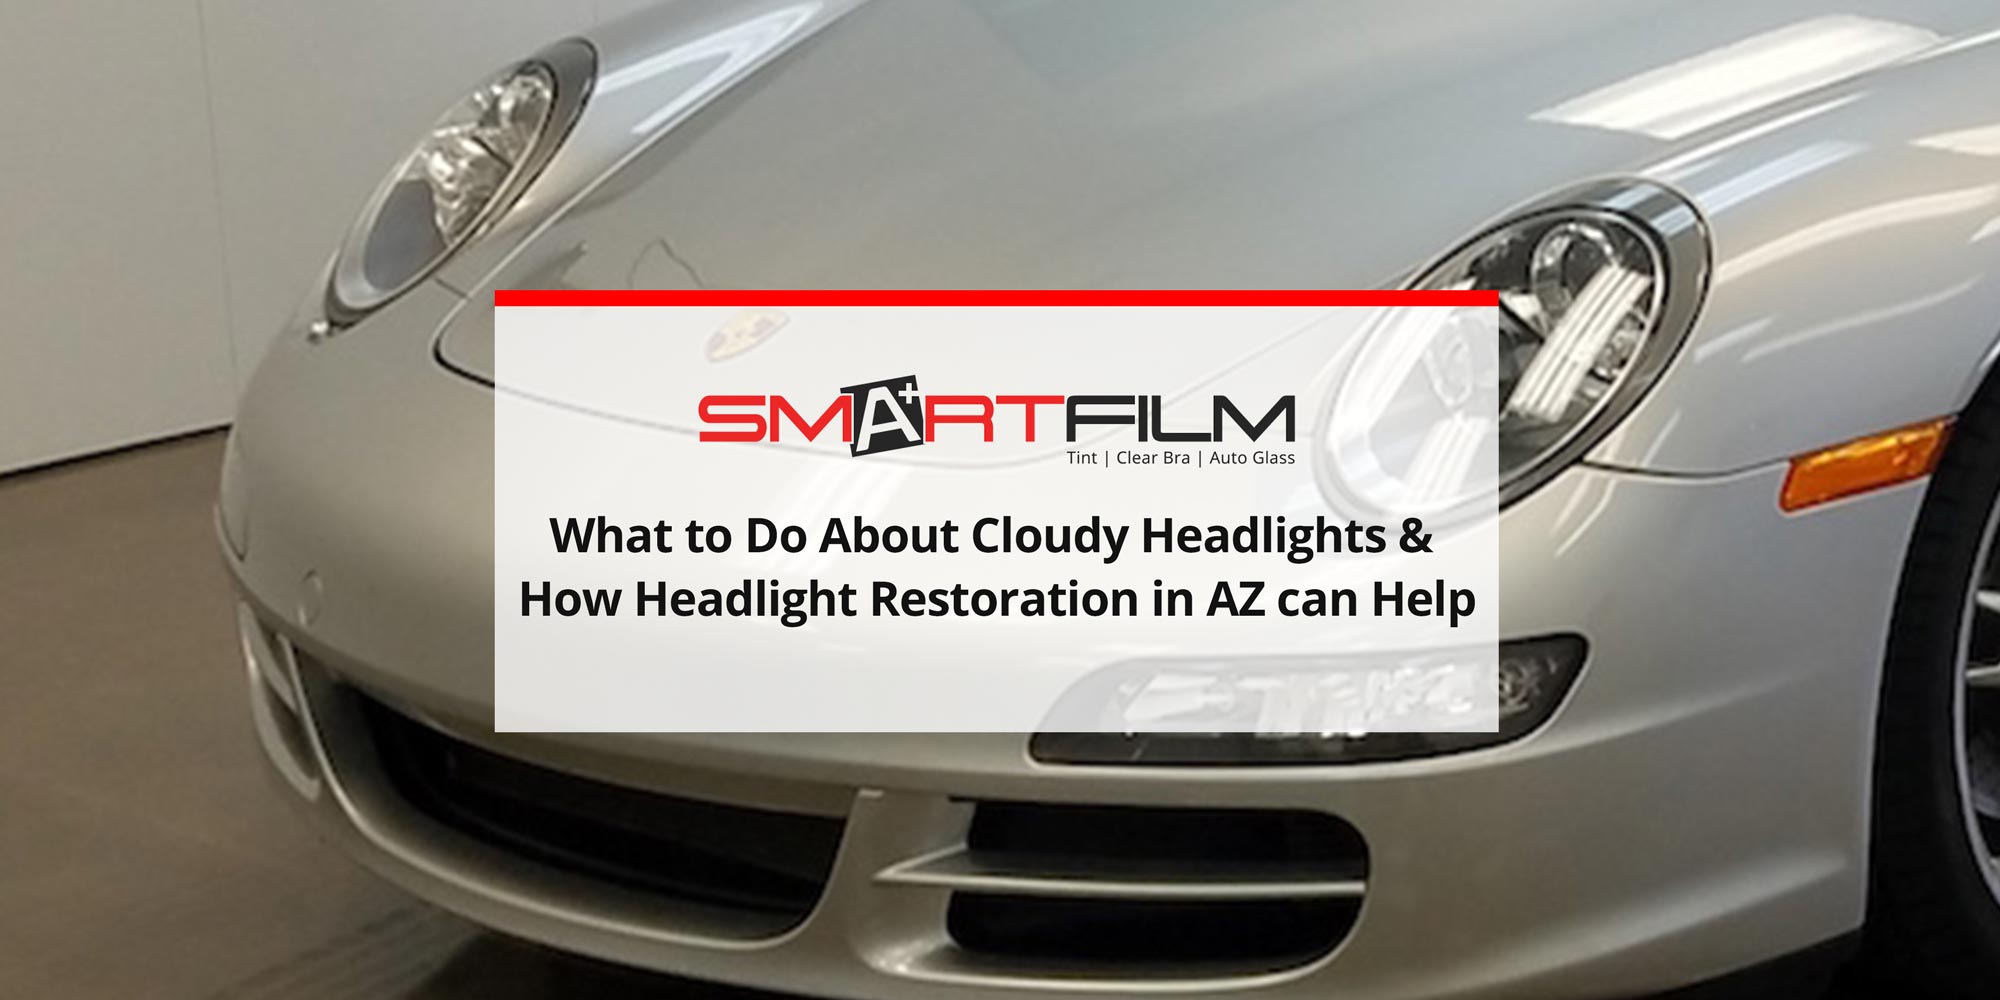 What to Do About Cloudy Headlights & How Headlight Restoration in AZ can Help